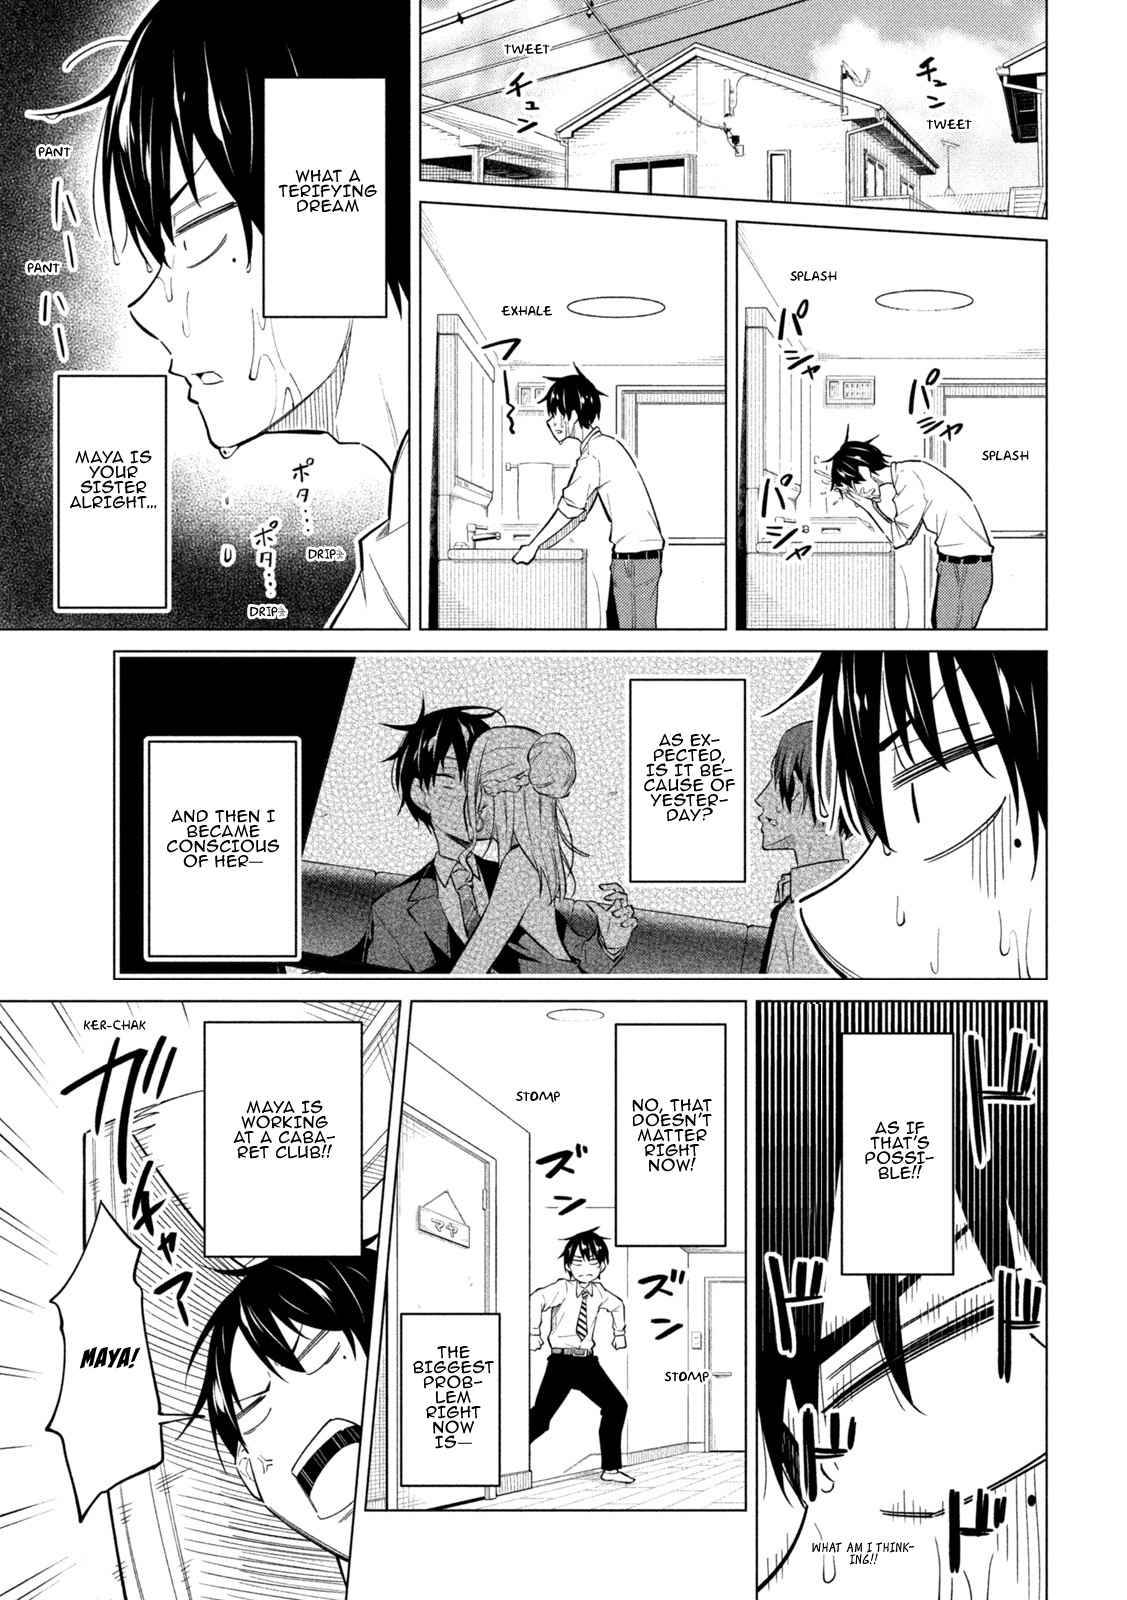 Home Cabaret ~Operation: Making A Cabaret Club At Home So Nii-Chan Can Get Used To Girls~ - chapter 2 - #3